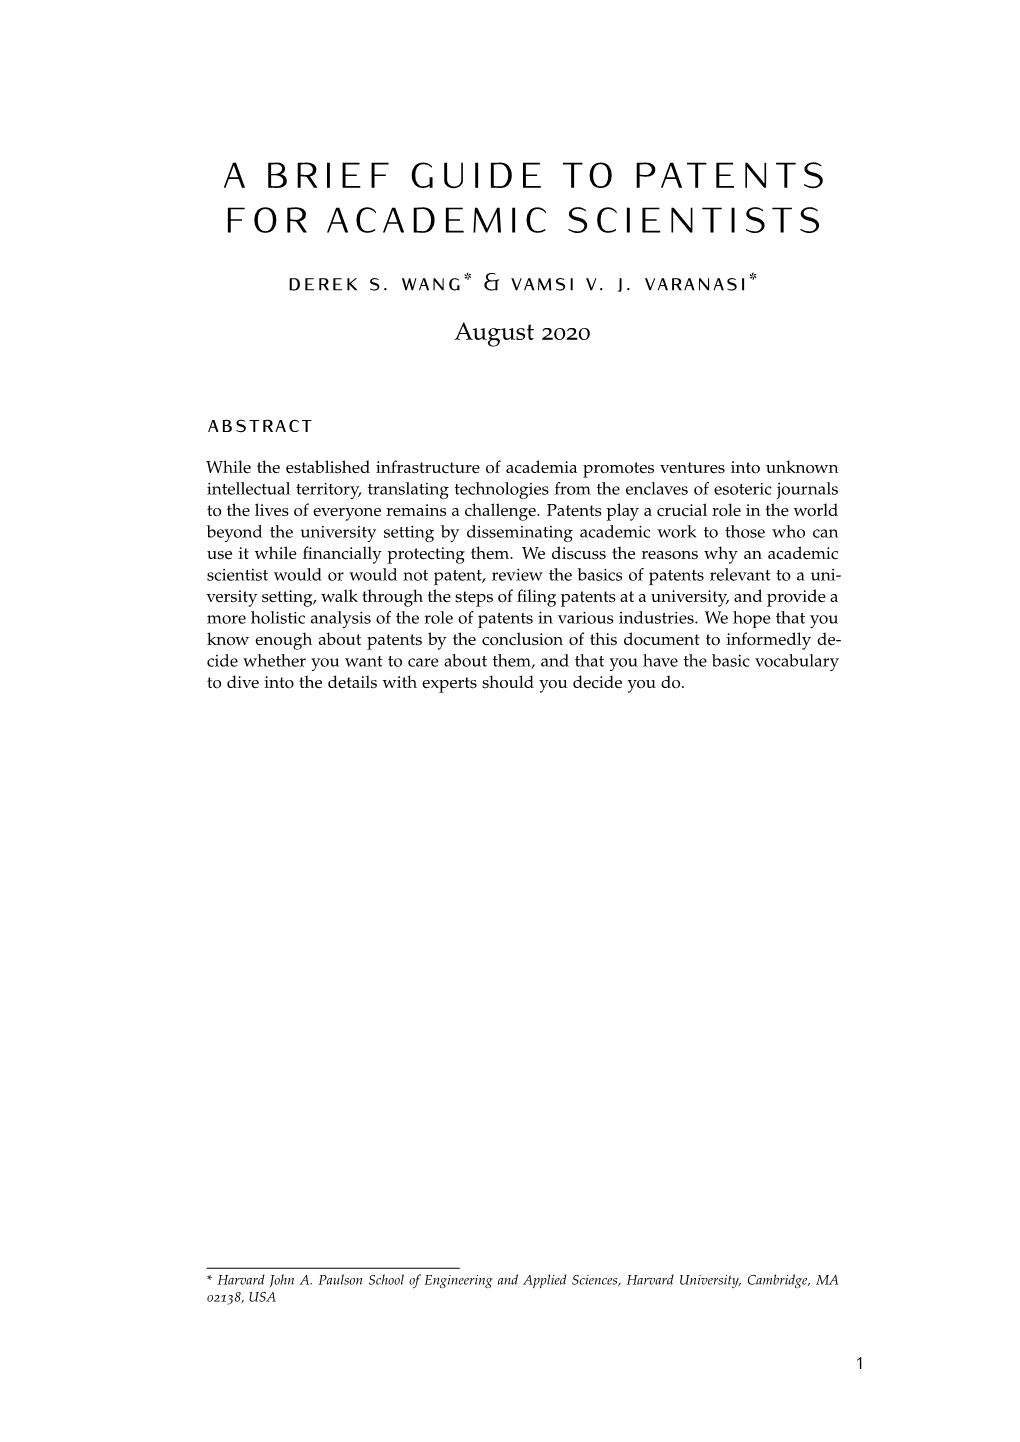 A Brief Guide to Patents for Academic Scientists